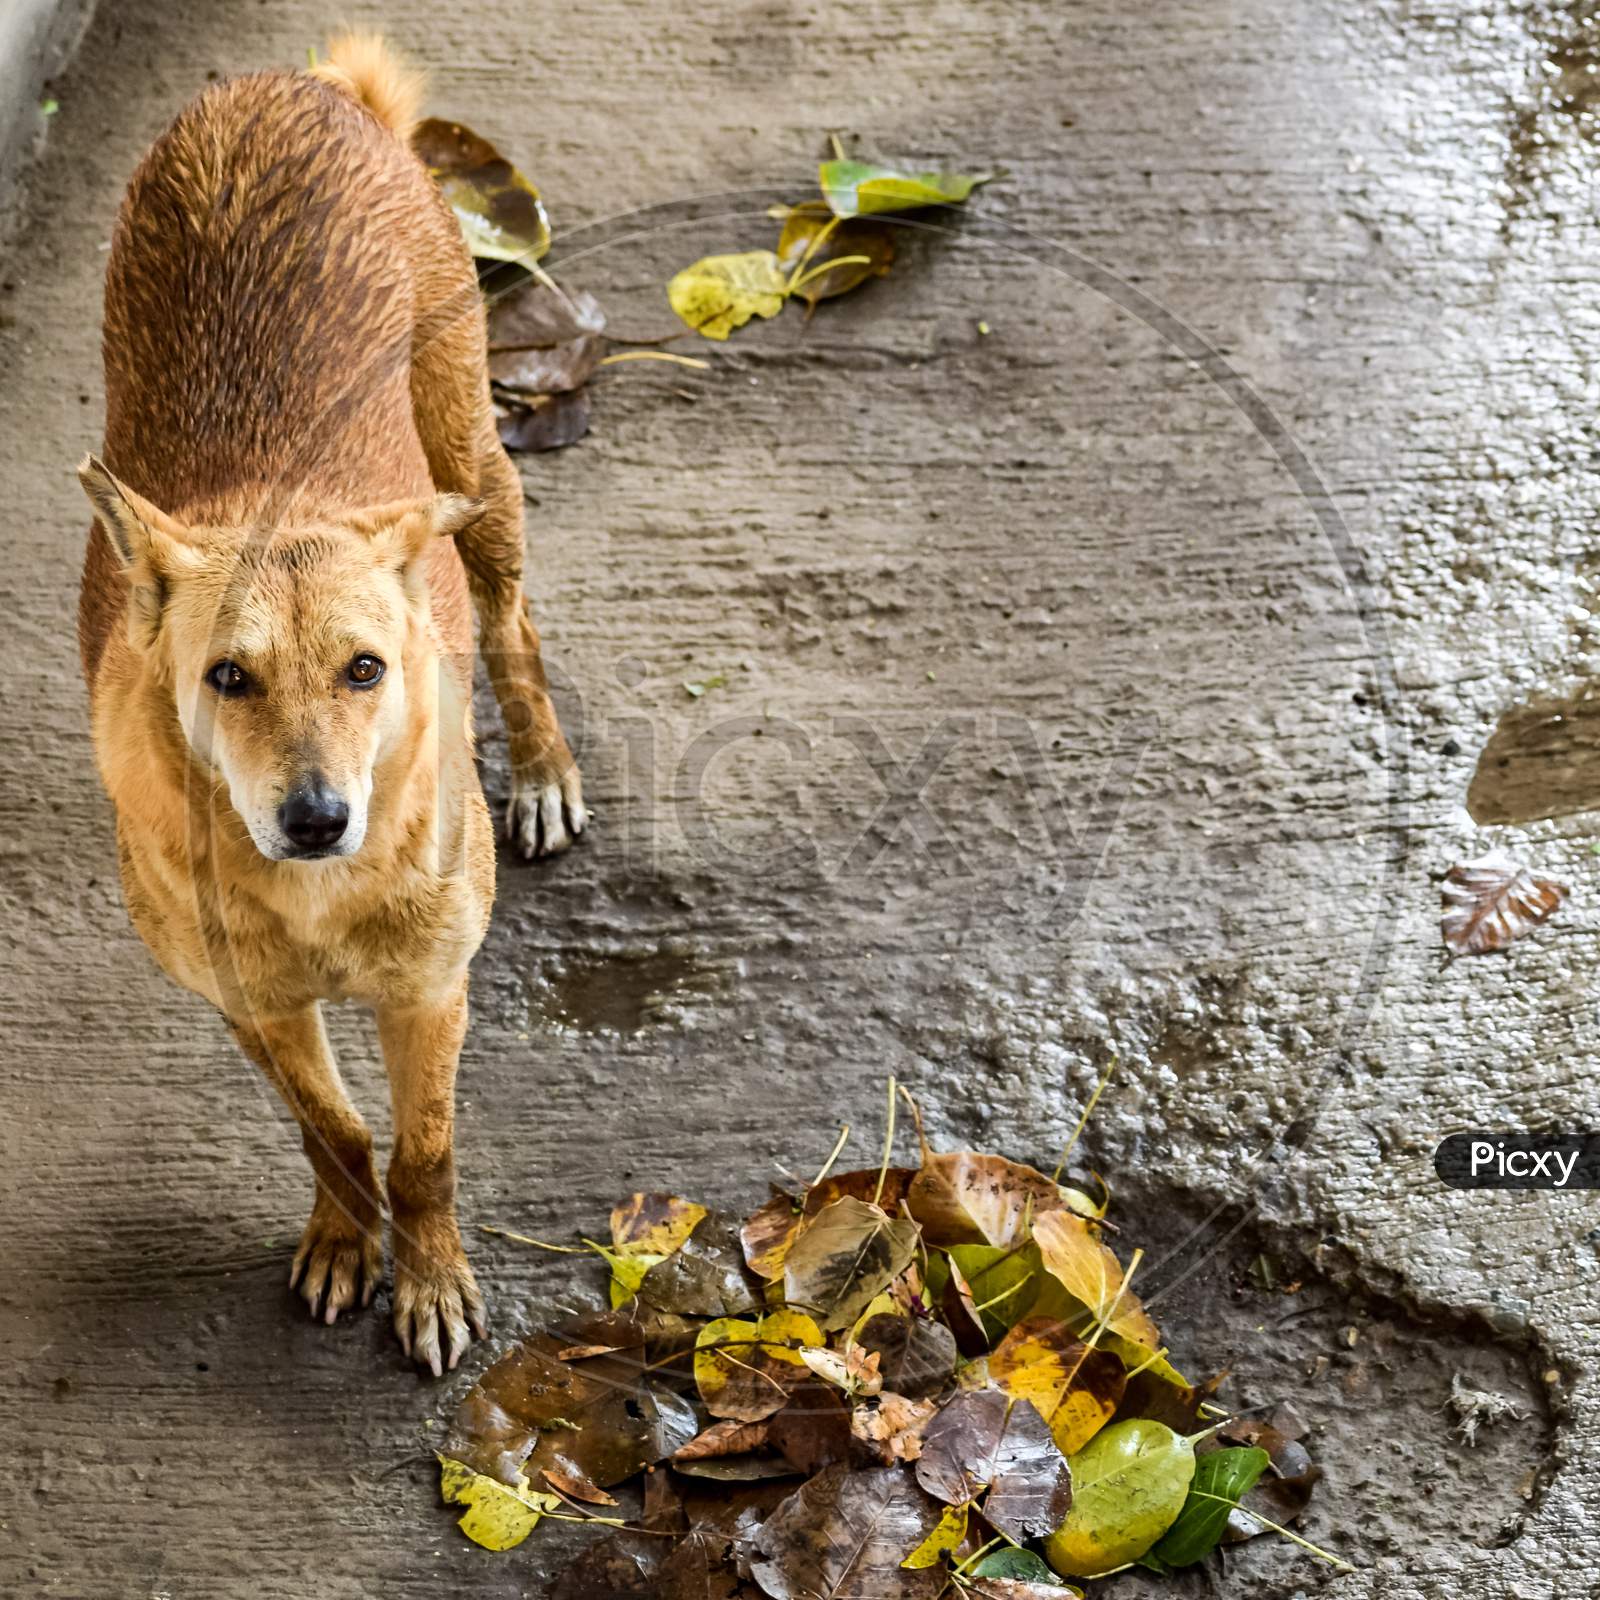 Street Dog Searching For Some Amazing Food, Dog In Old Delhi Area Chandni Chowk In New Delhi, India, Delhi Street Photography